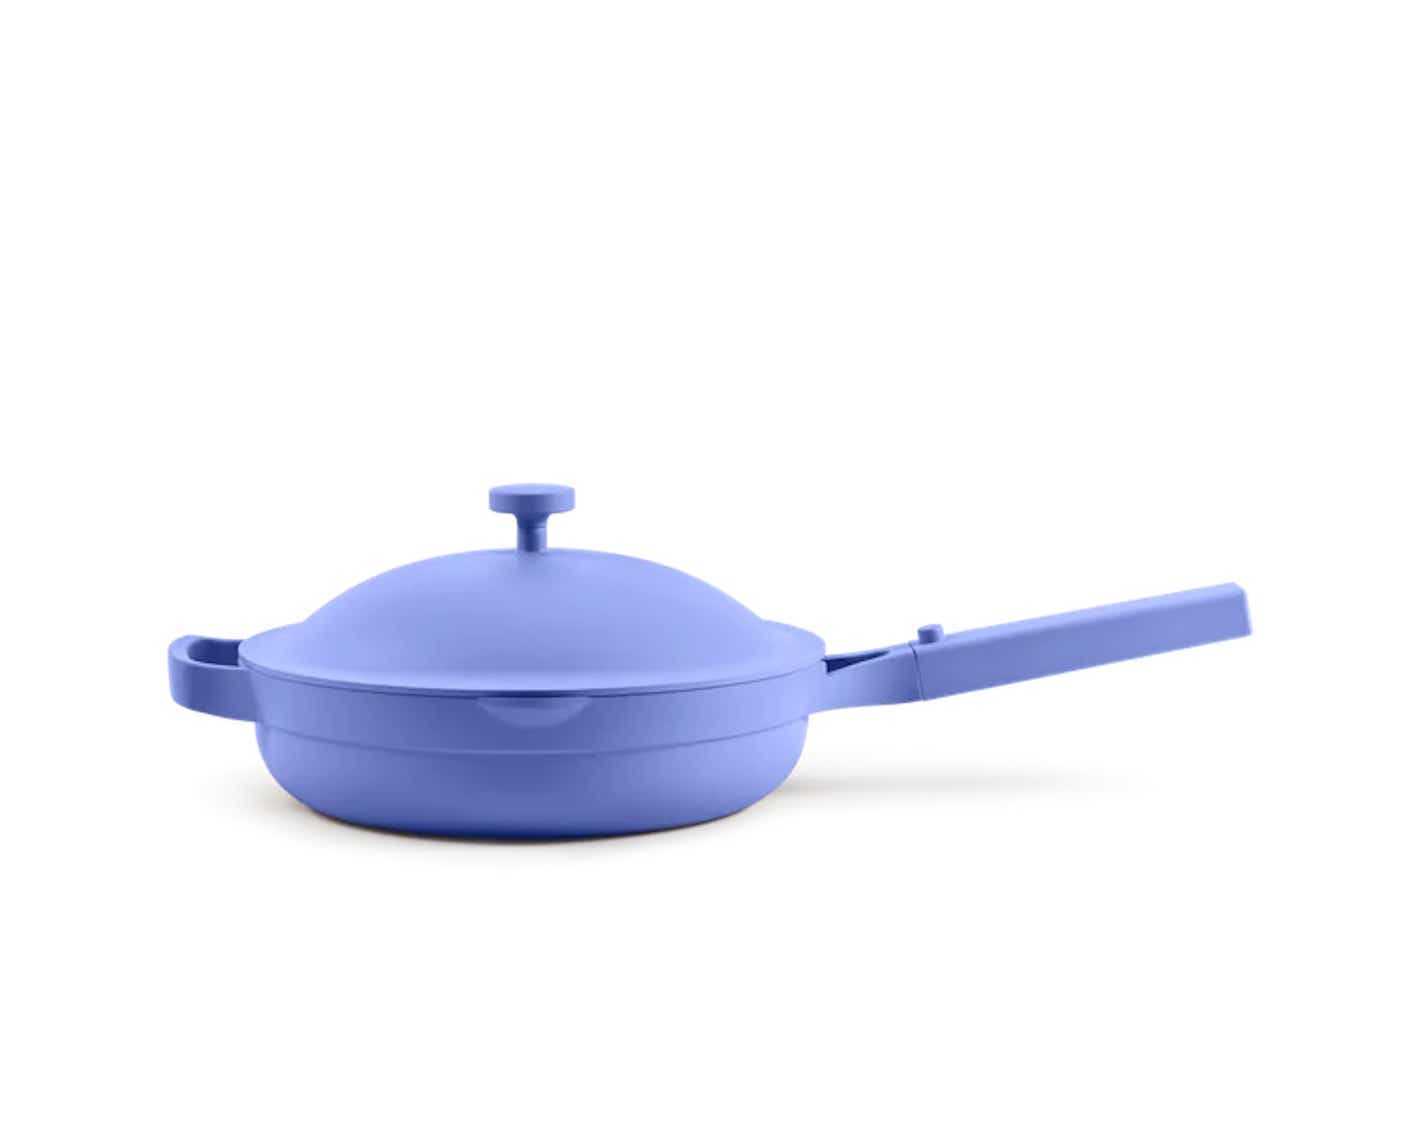 A bright blue nonstick skillet with a long handle pictured in front of a blue background.